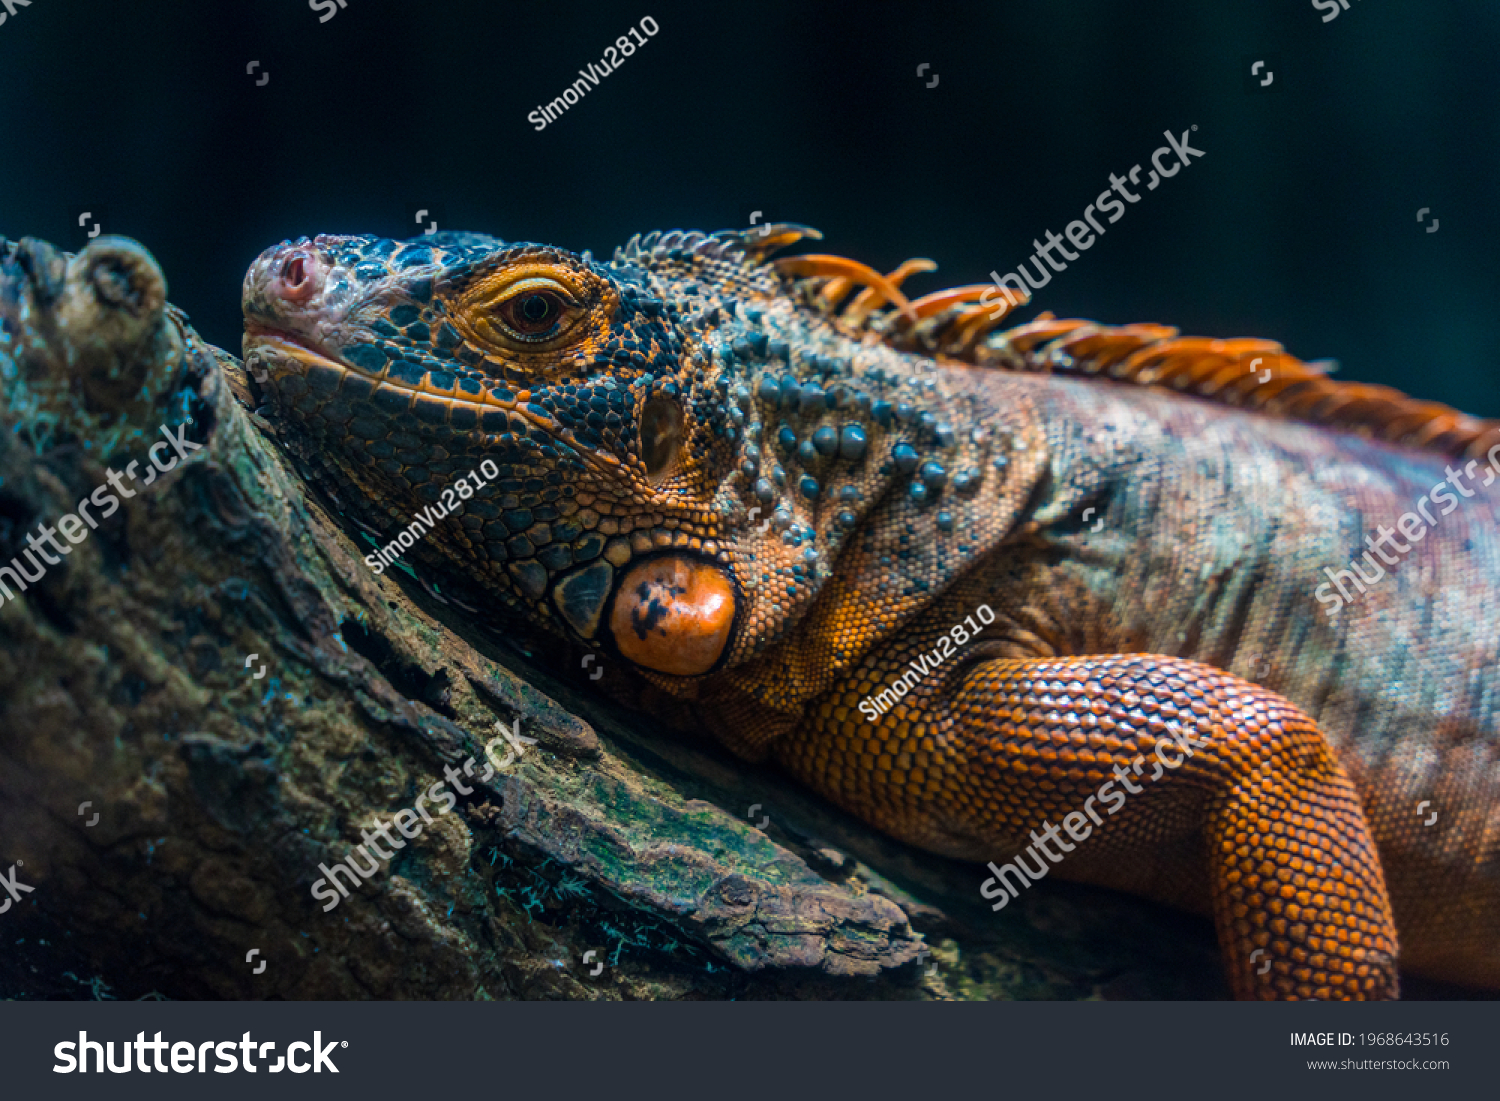 Green iguana. Iguana - also known as Common iguana or American iguana. Lizard families, look toward a bright eyes looking in the same direction as we find something new life. Selective focus. #1968643516